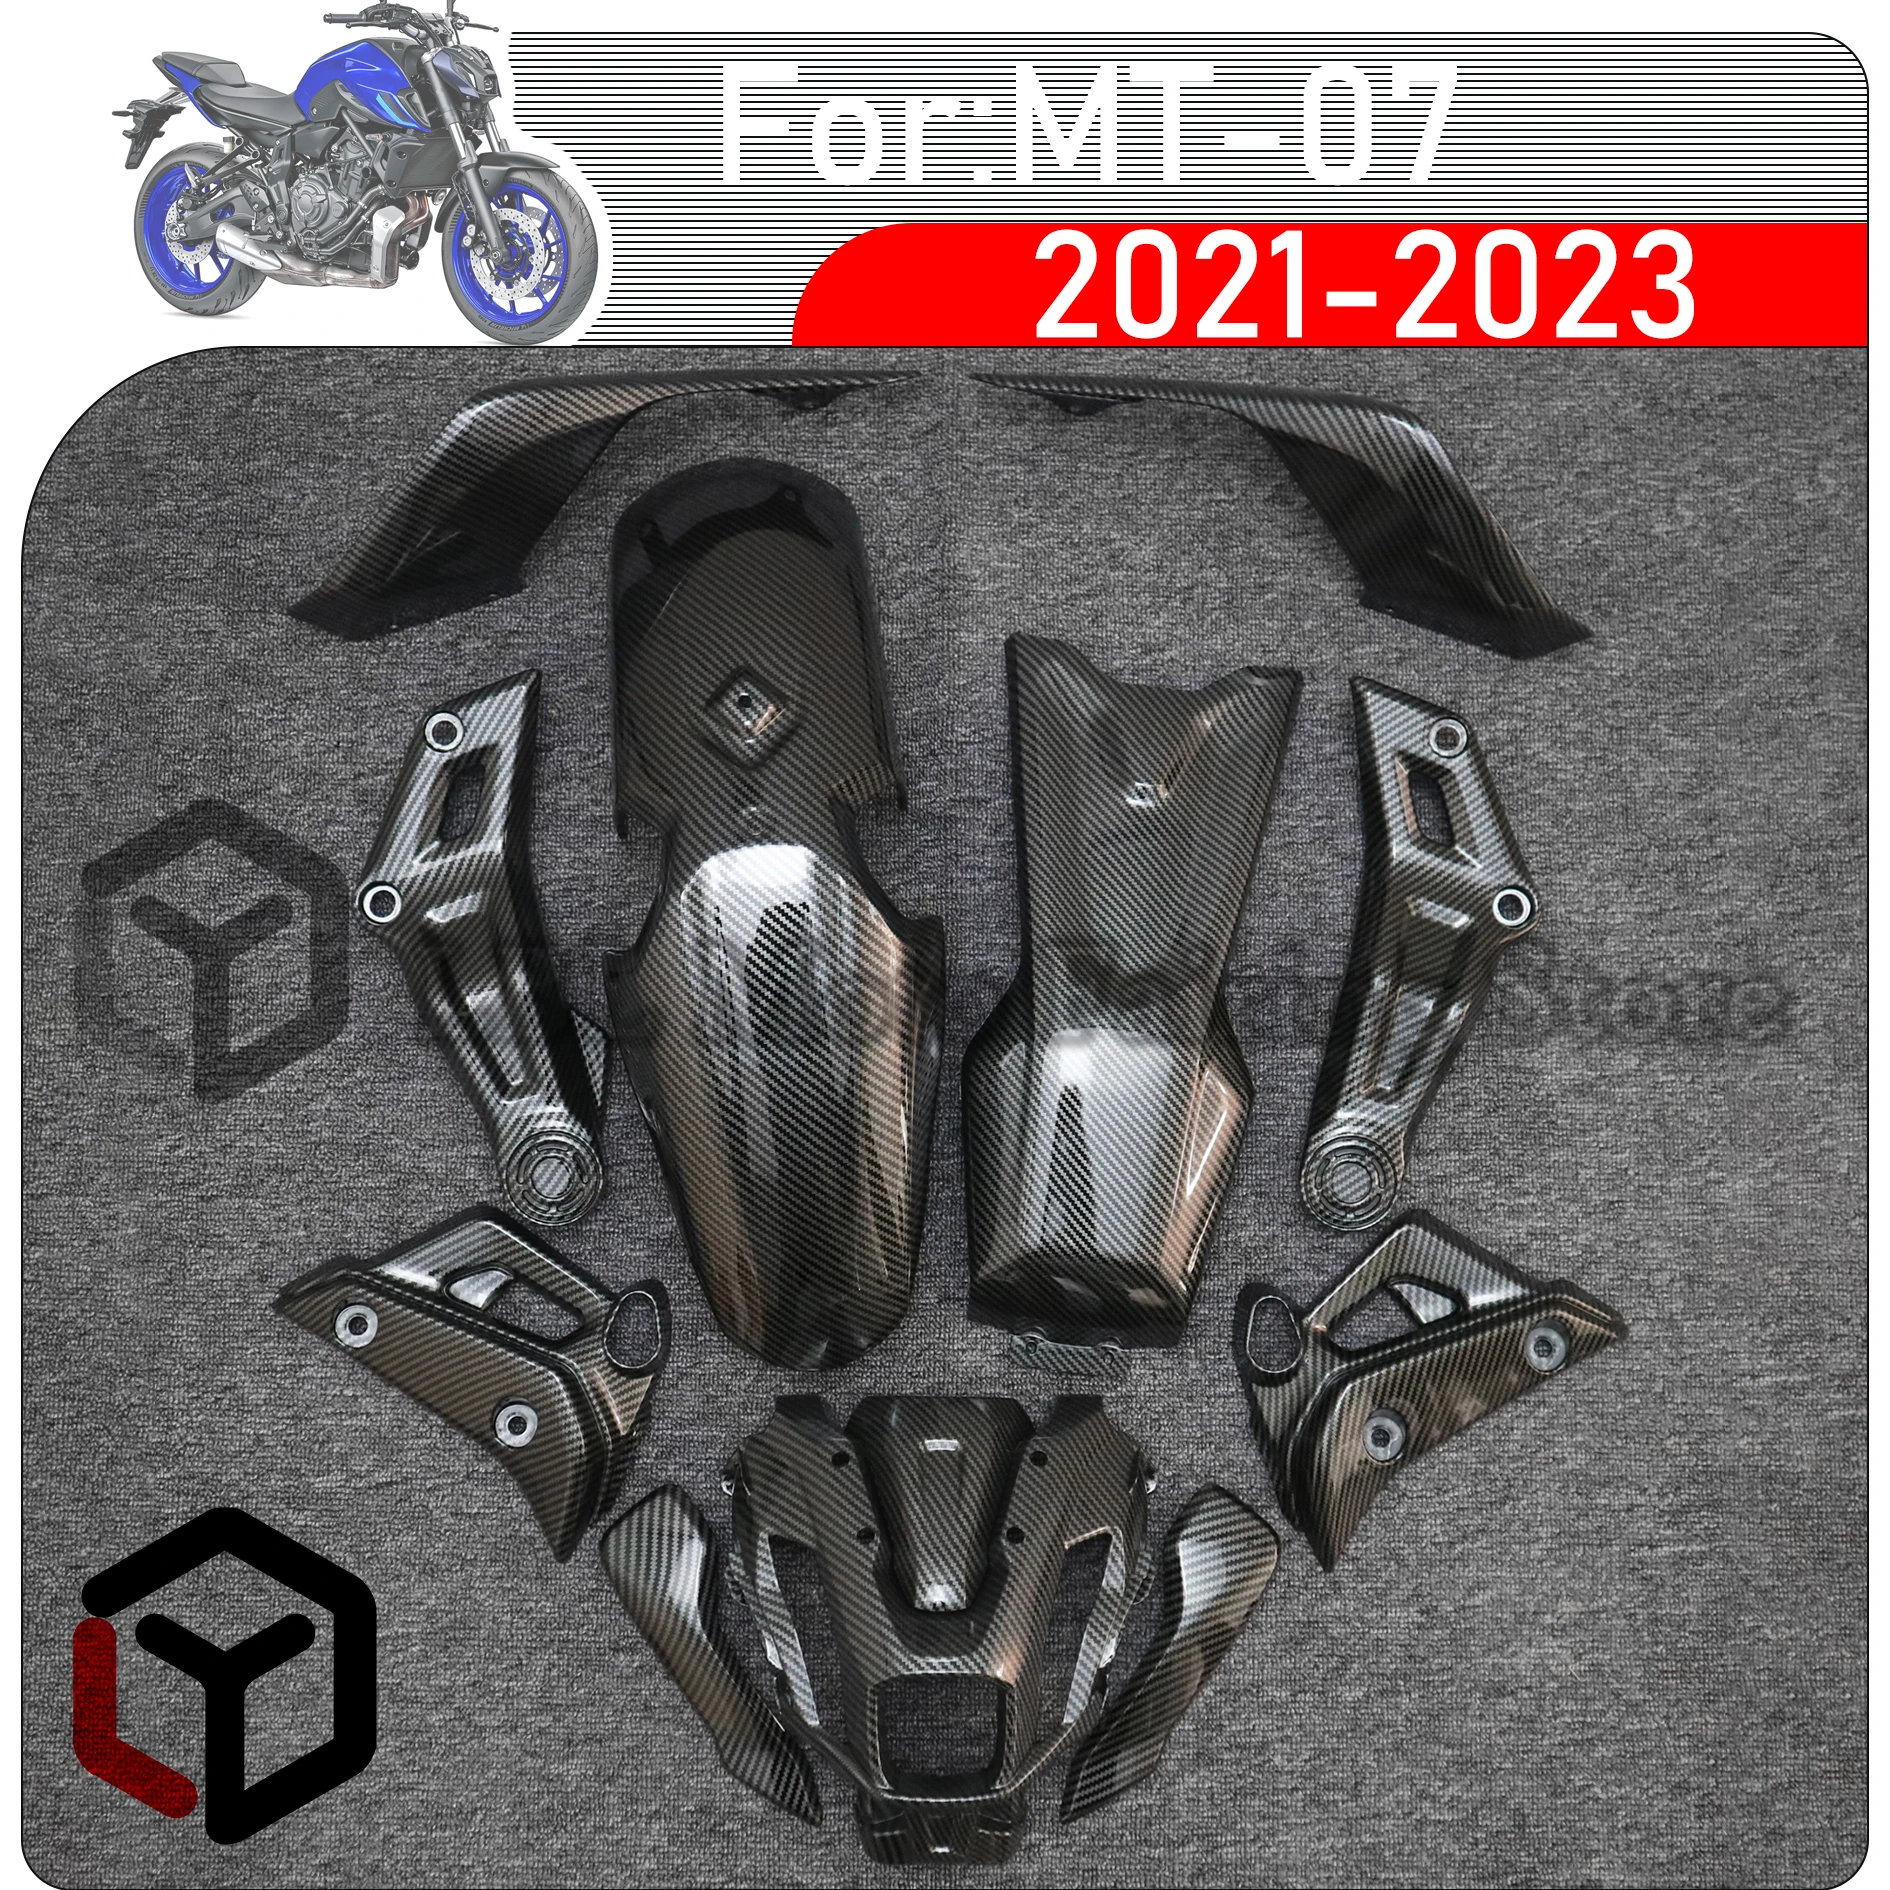 

For YAMAHA MT07 MT-07 MT 07 2021 2022 2023 Motorcycle Fairings Injection Mold Painted ABS Plastic Bodywork Kit Sets